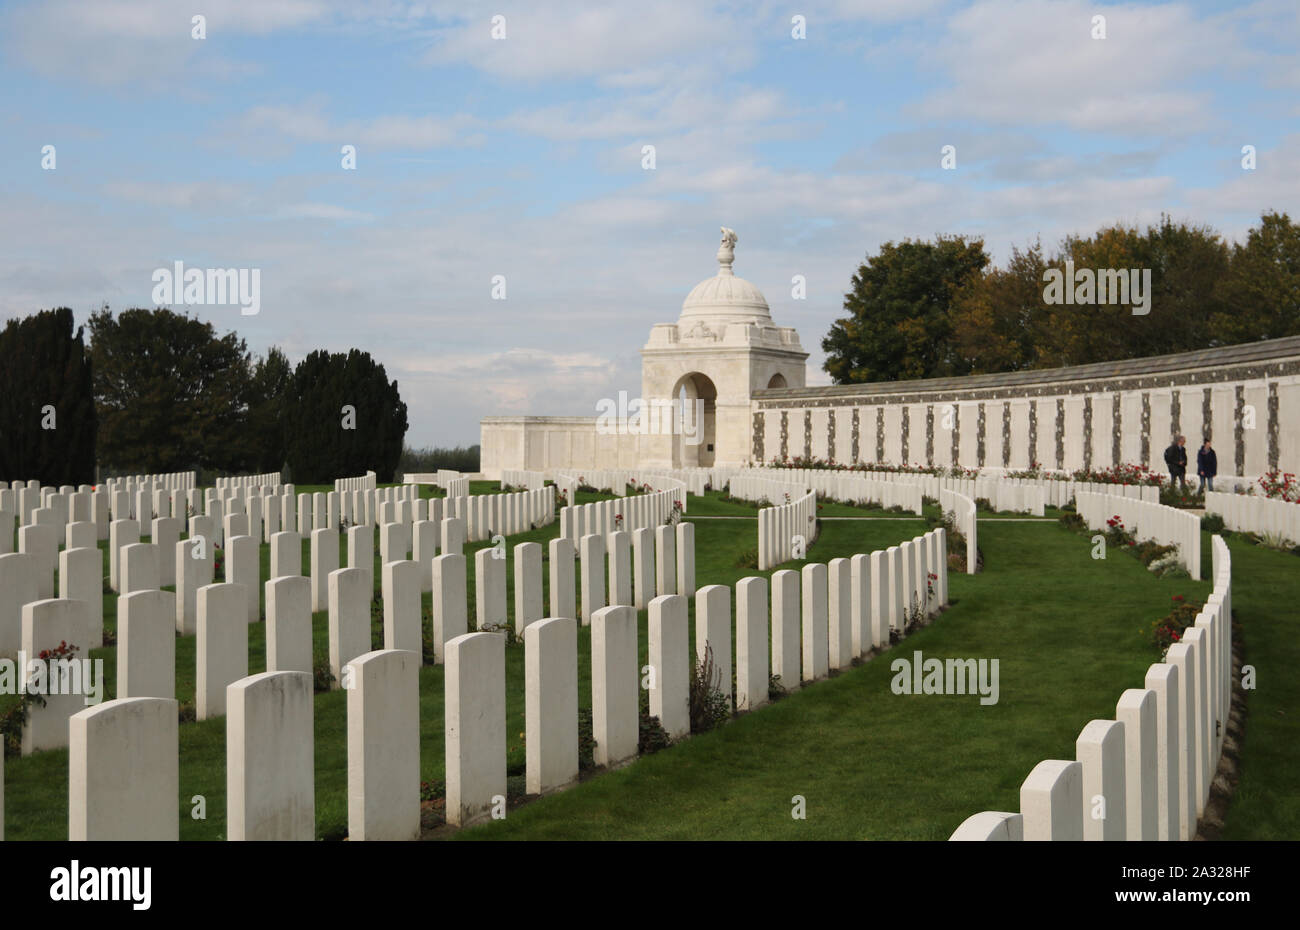 Zonnebeke, Belgium, 09/10/2017. Tyne Cot Cemetery, the largest Commonwealth war cemetery in the world in terms of burials. The Tyne Cot Memorial Stock Photo